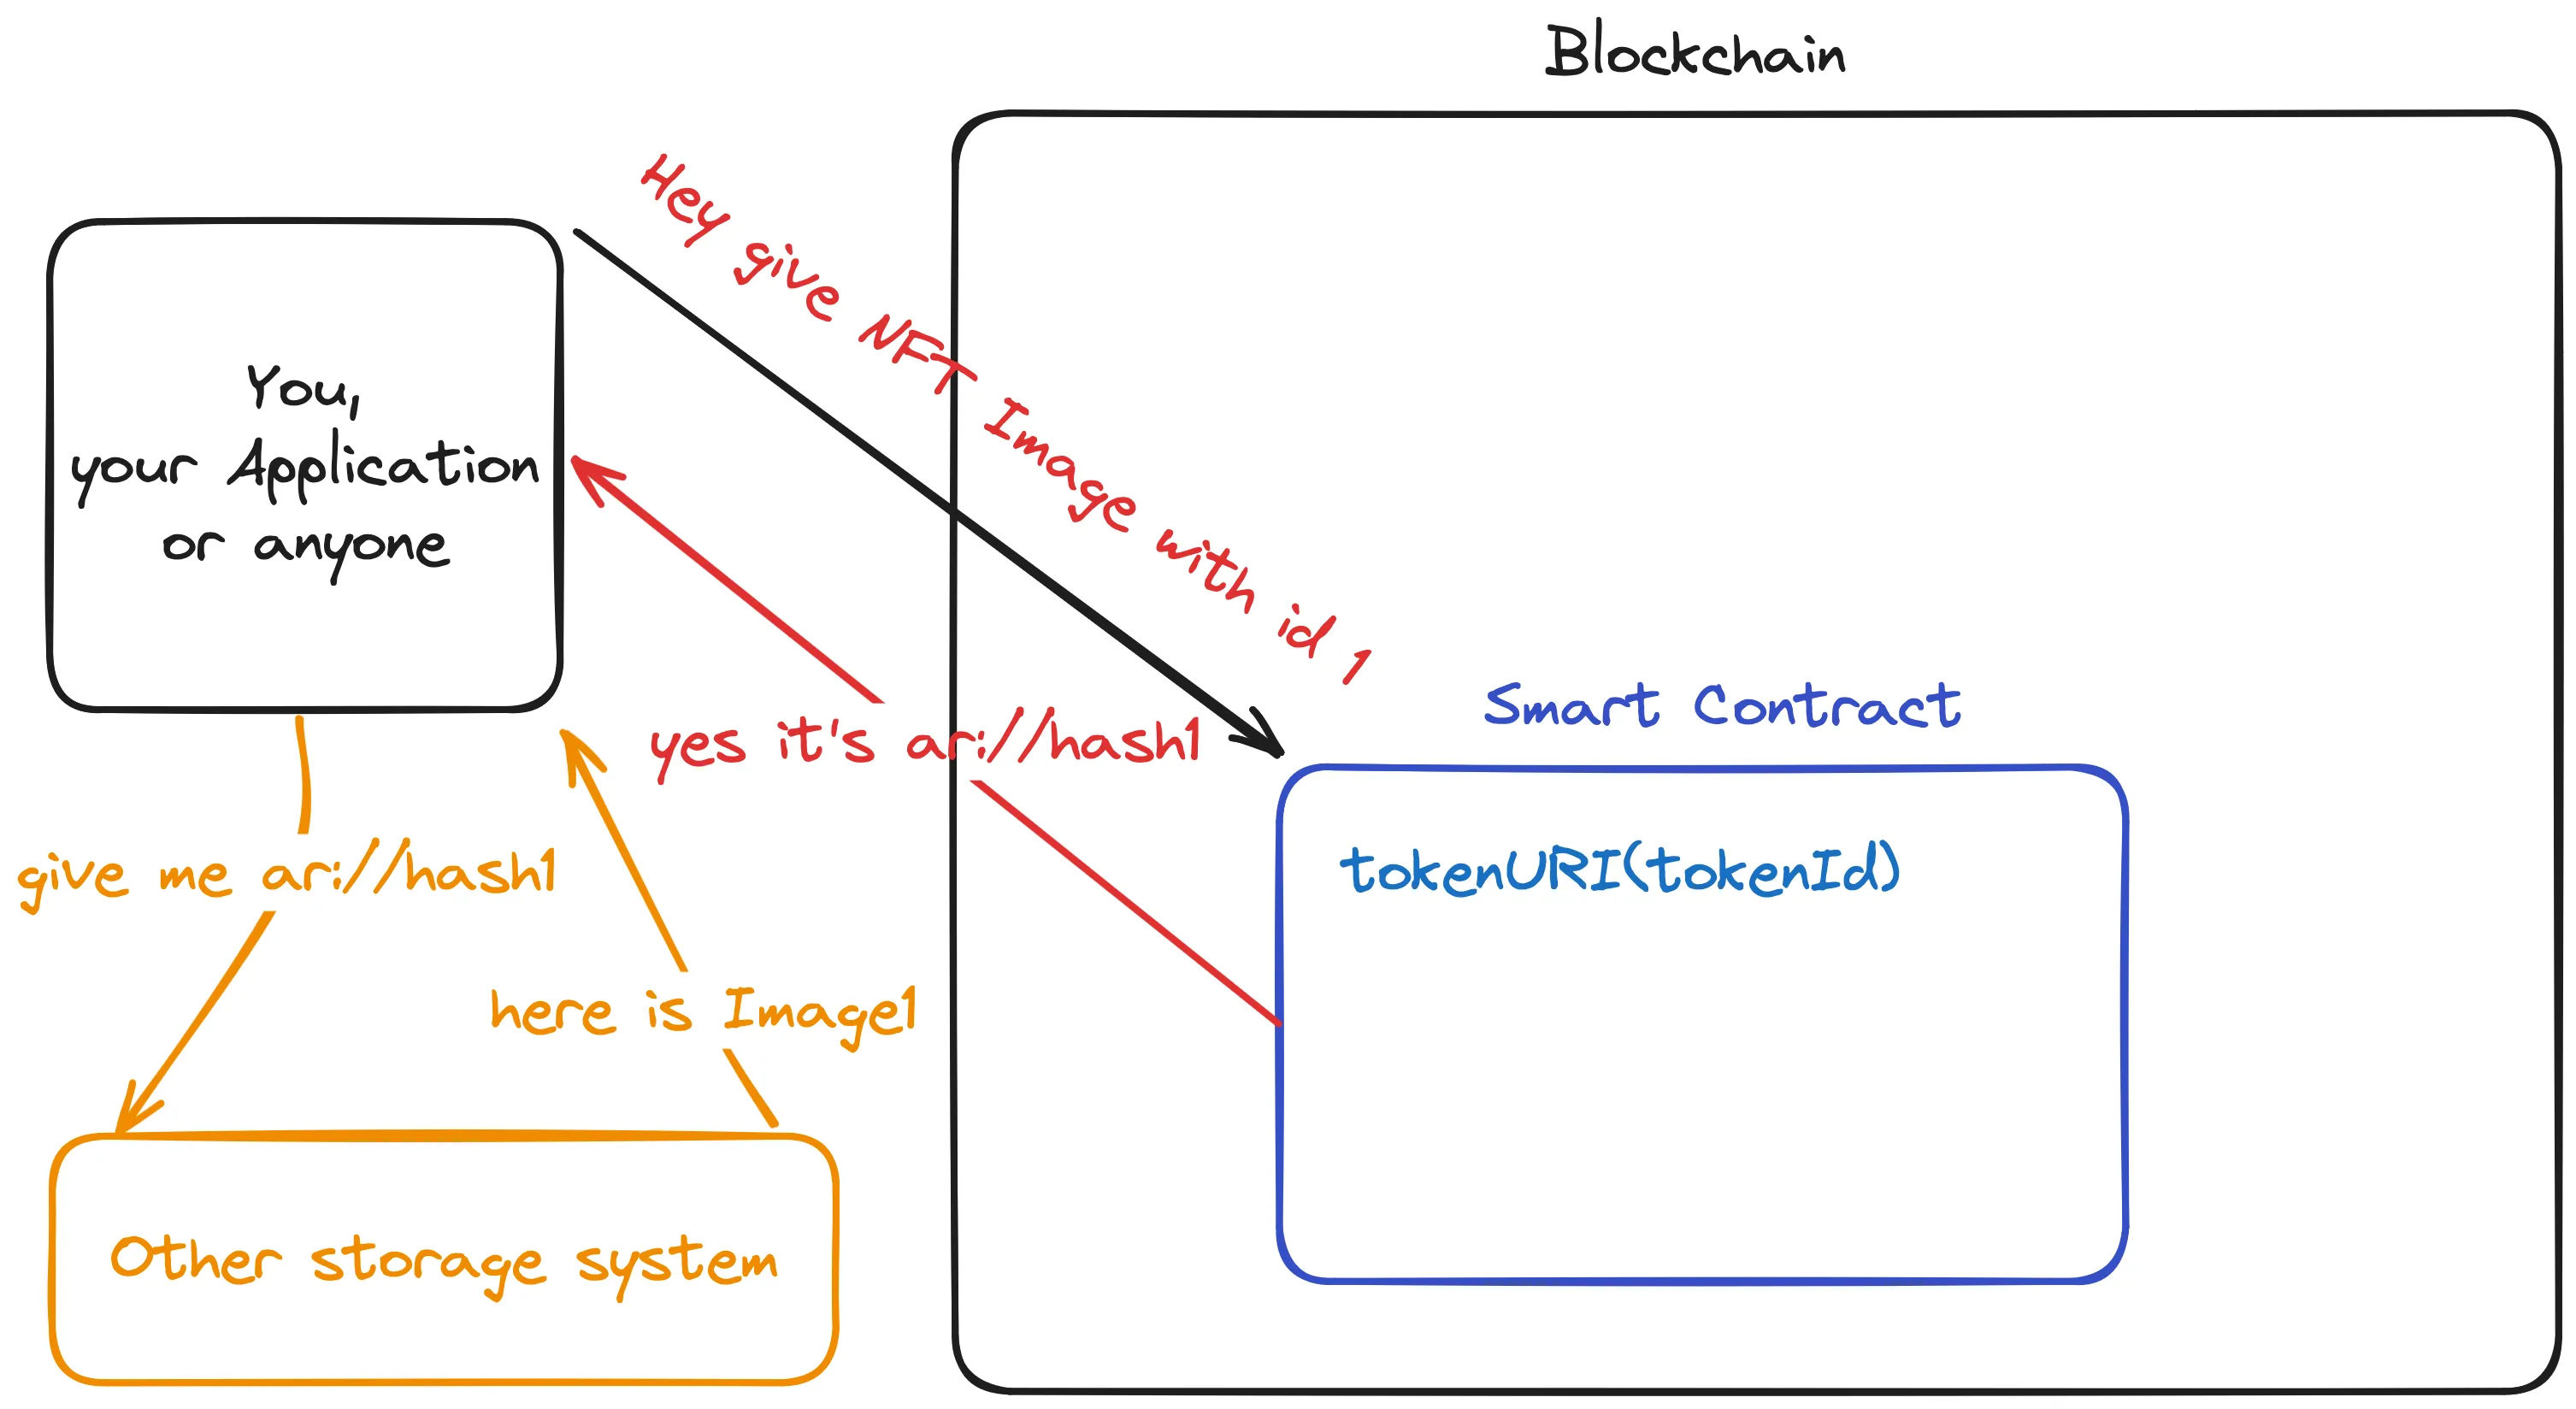 Linking to Offchain storage from Blockchain SmartContract visualized